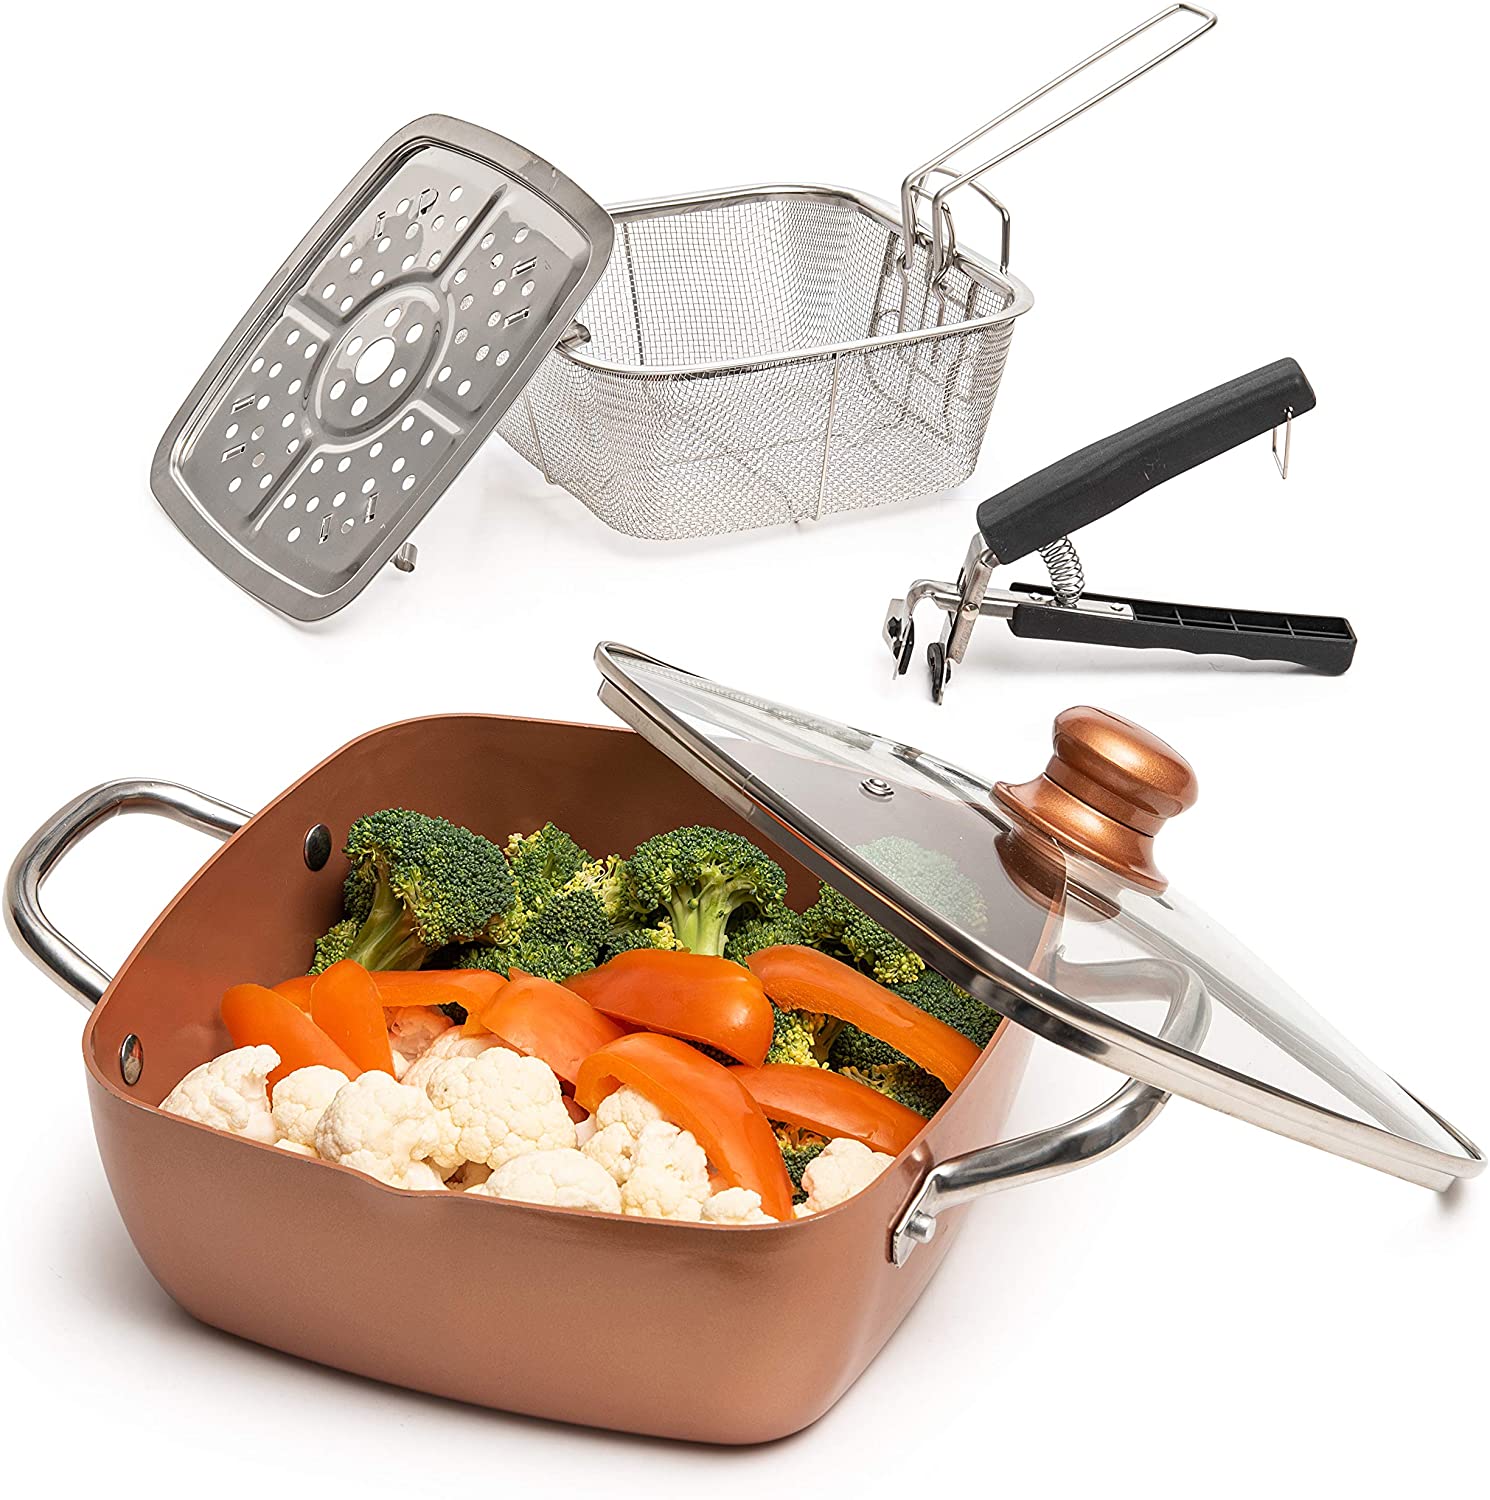 Moss & Stone Multi-Use Easy Clean Copper Cookware, 5-Piece